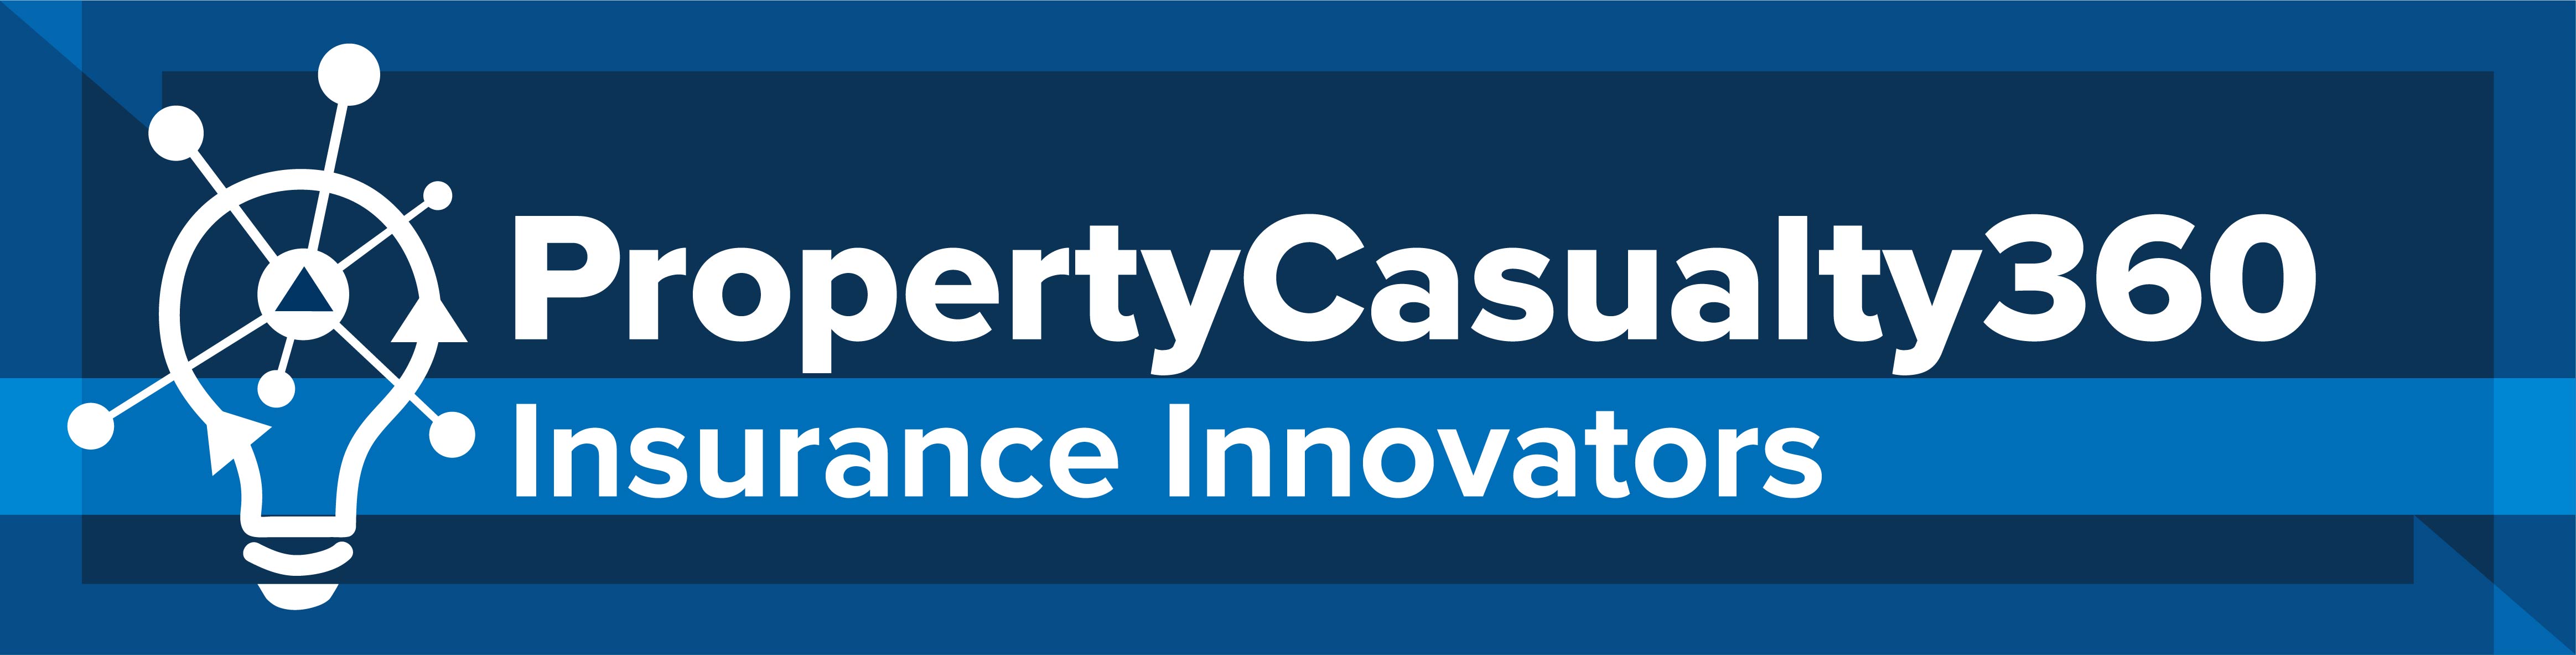 PropertyCasualty360 Property & Casualty Insurance News & Tips